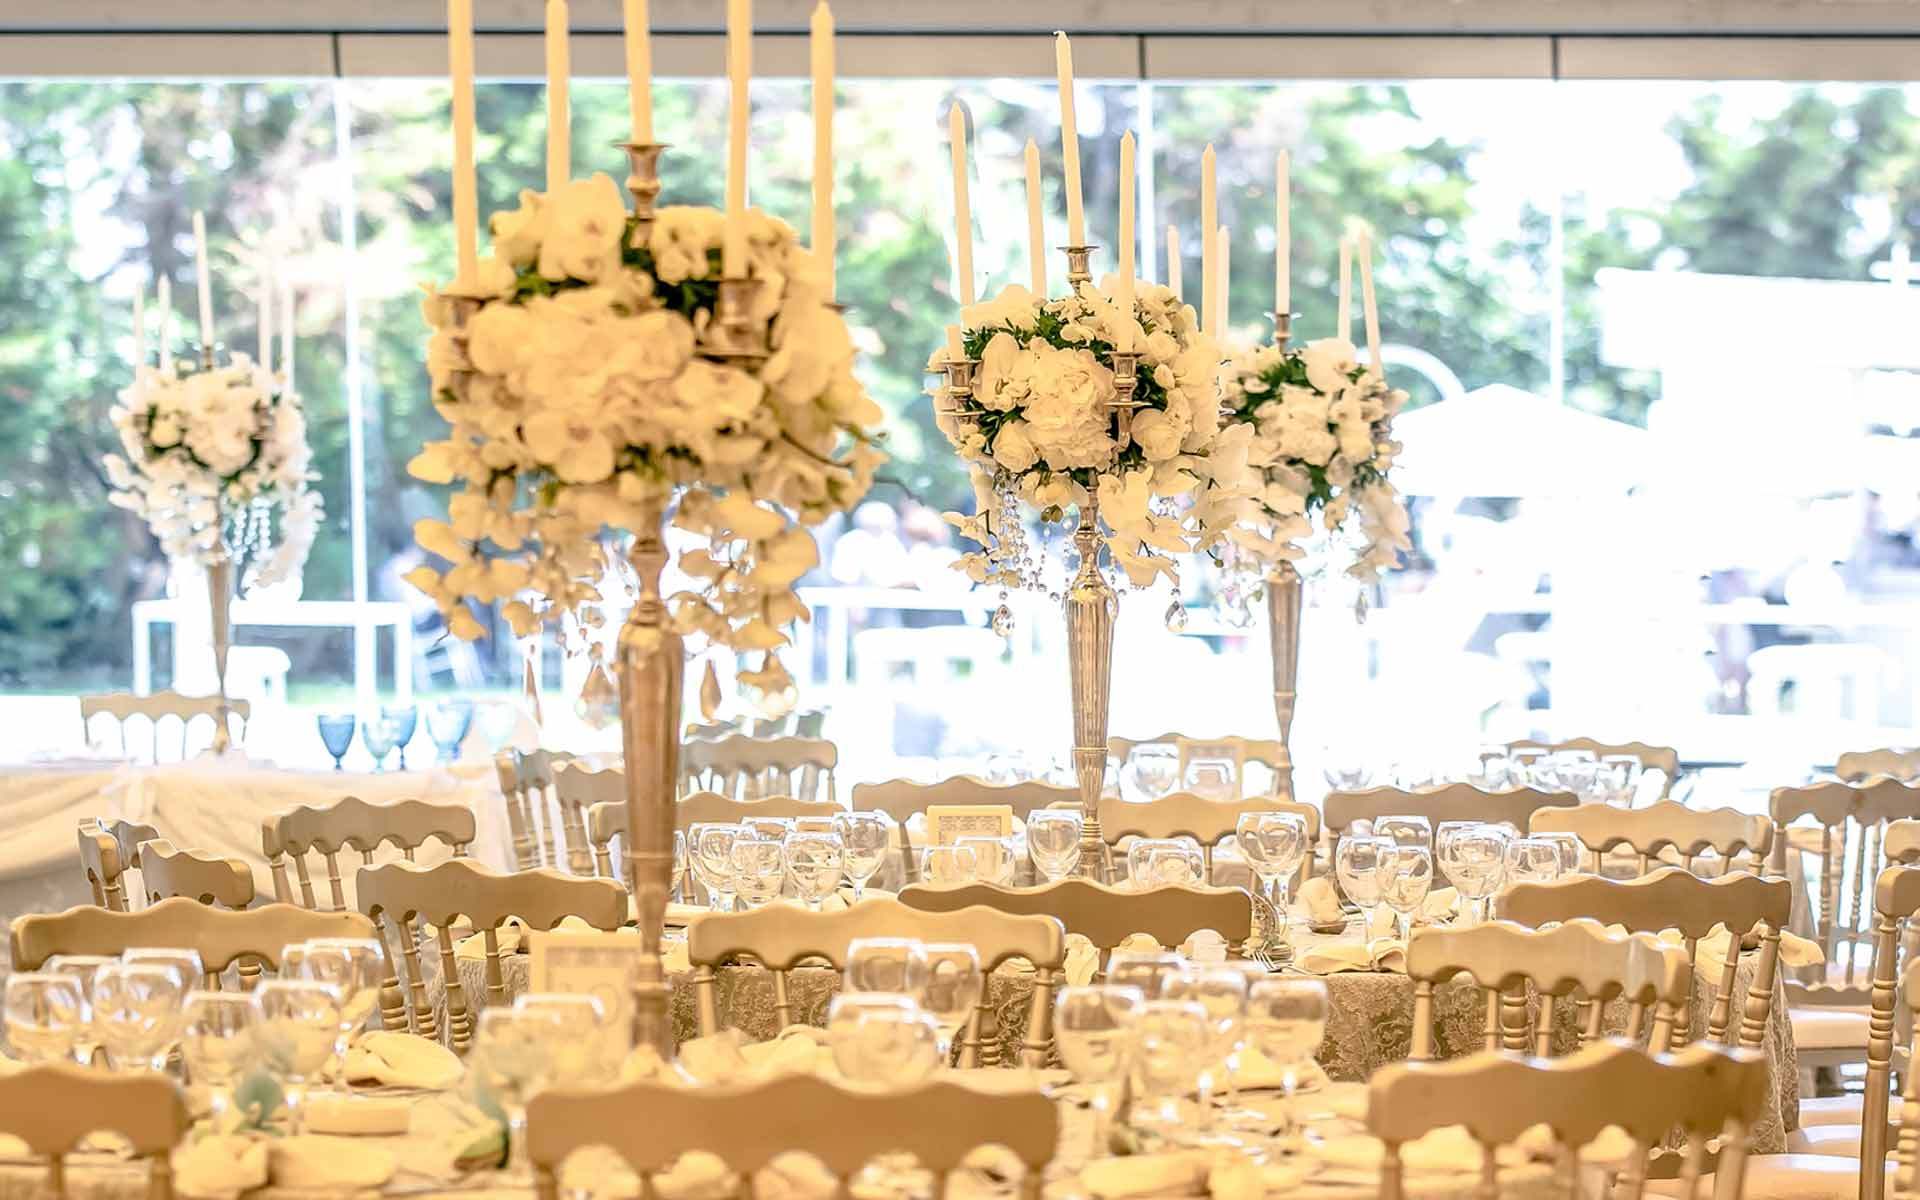 Extravagant-Dream-Wedding-candelabras-with-crystals-and-white-orchids